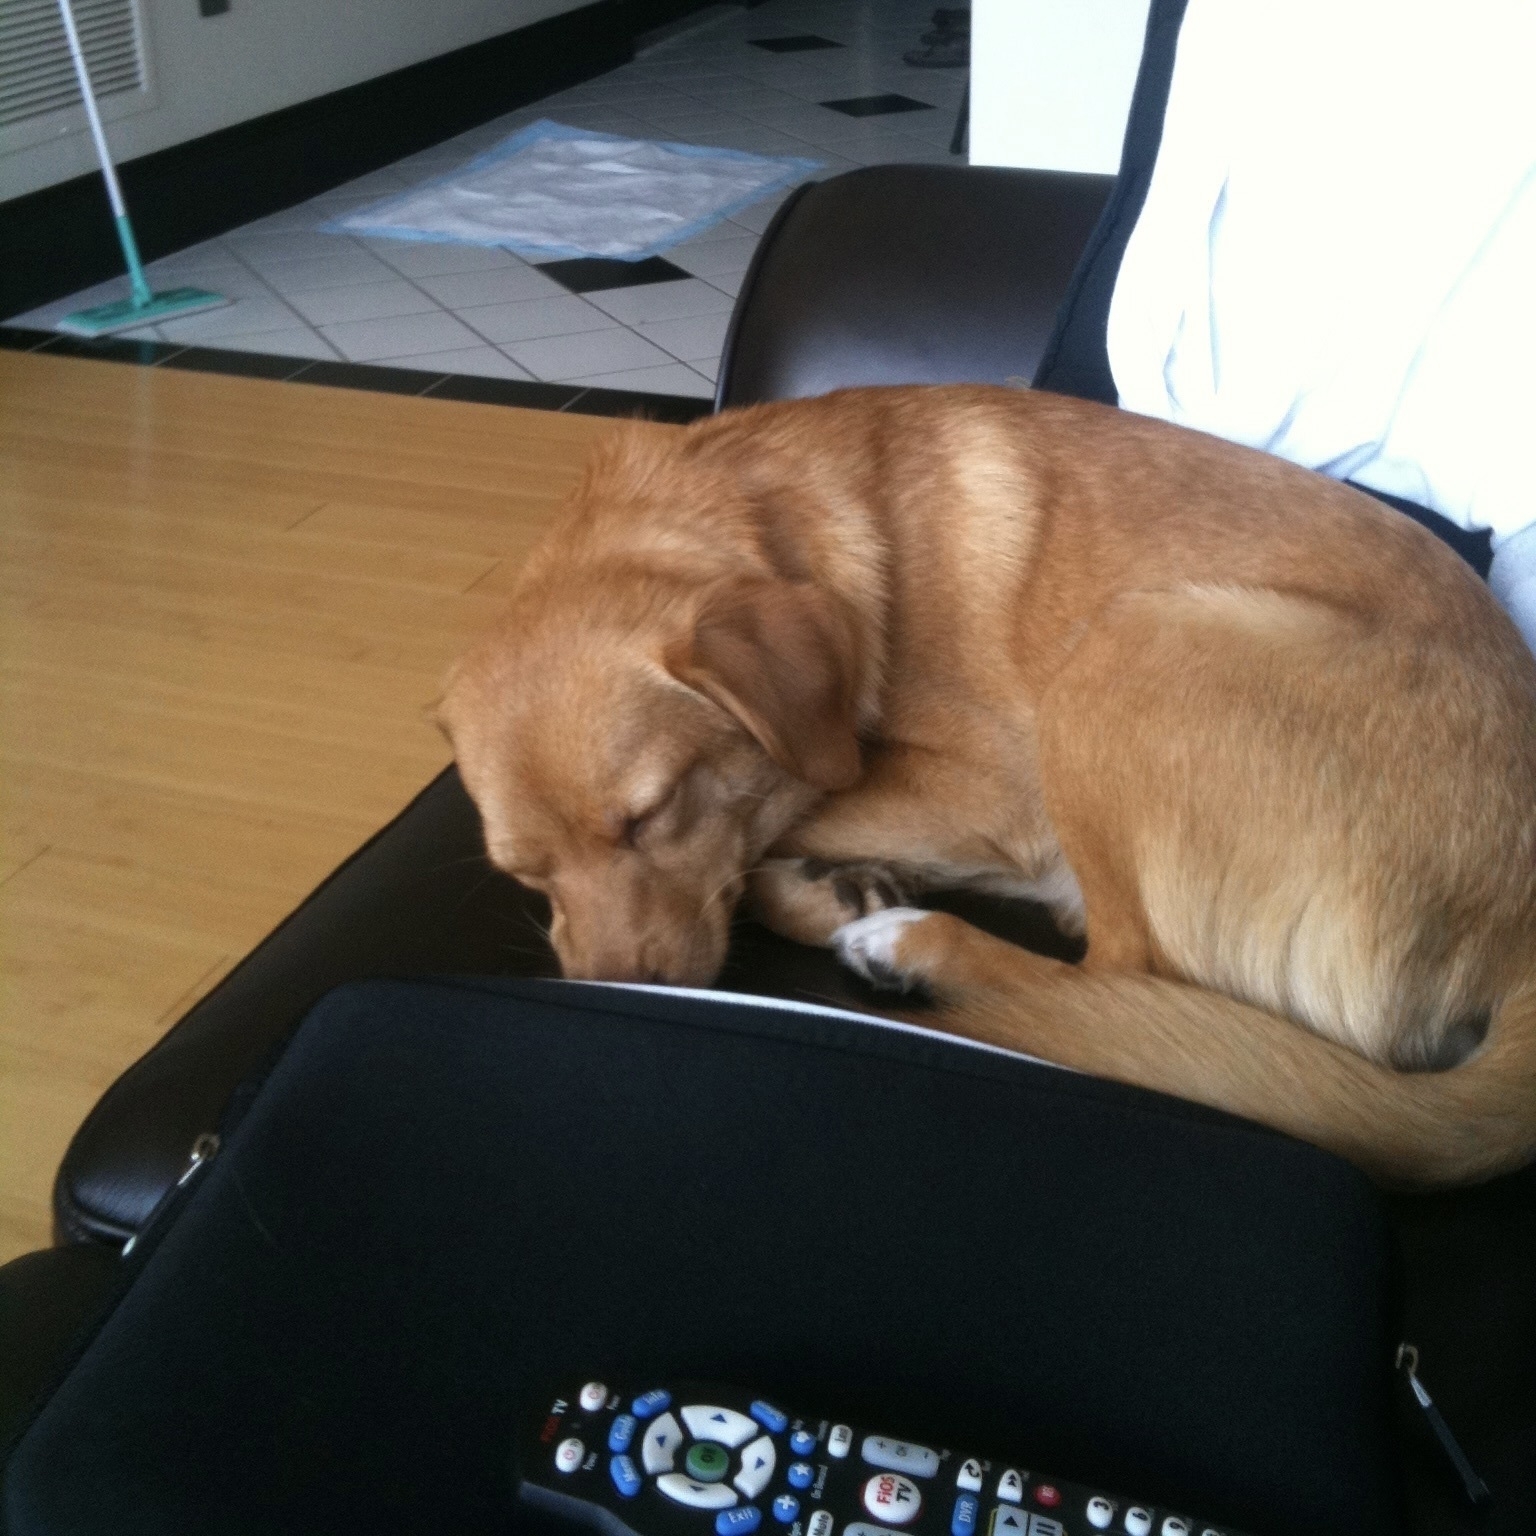 Gracie about 1 month after we got her, when she first moved into our condo with us. She’s a golden colored dog with a fluffy tail lying with her eyes closed, curled up on a brown leather couch.